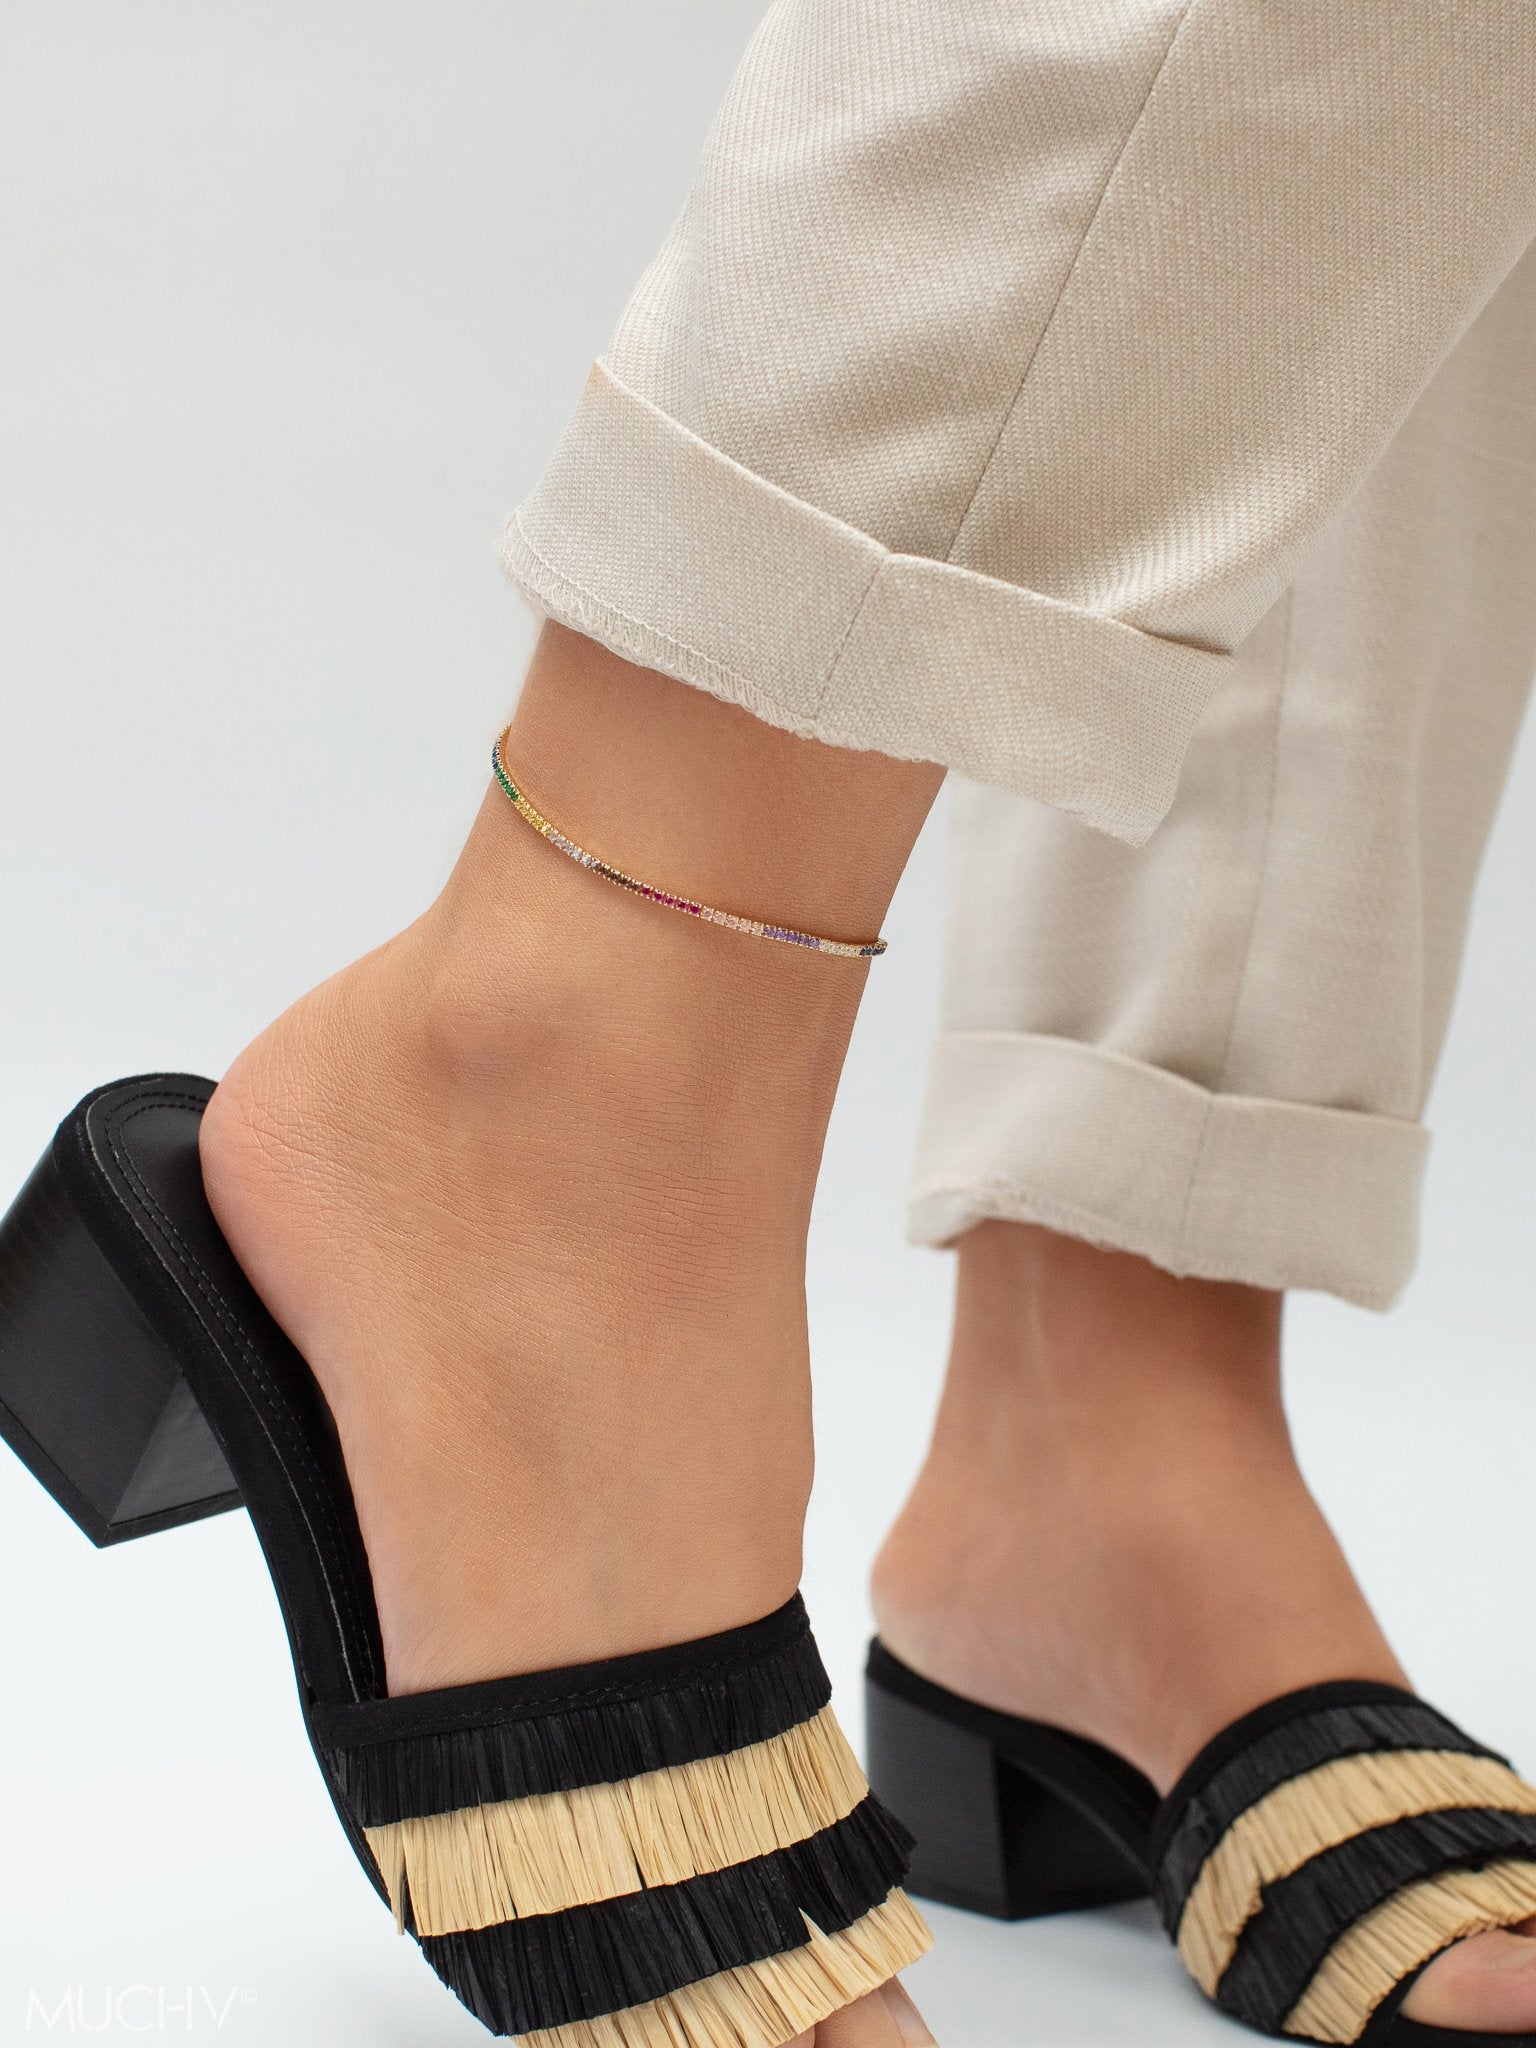 Anklets - Muchv Jewellery